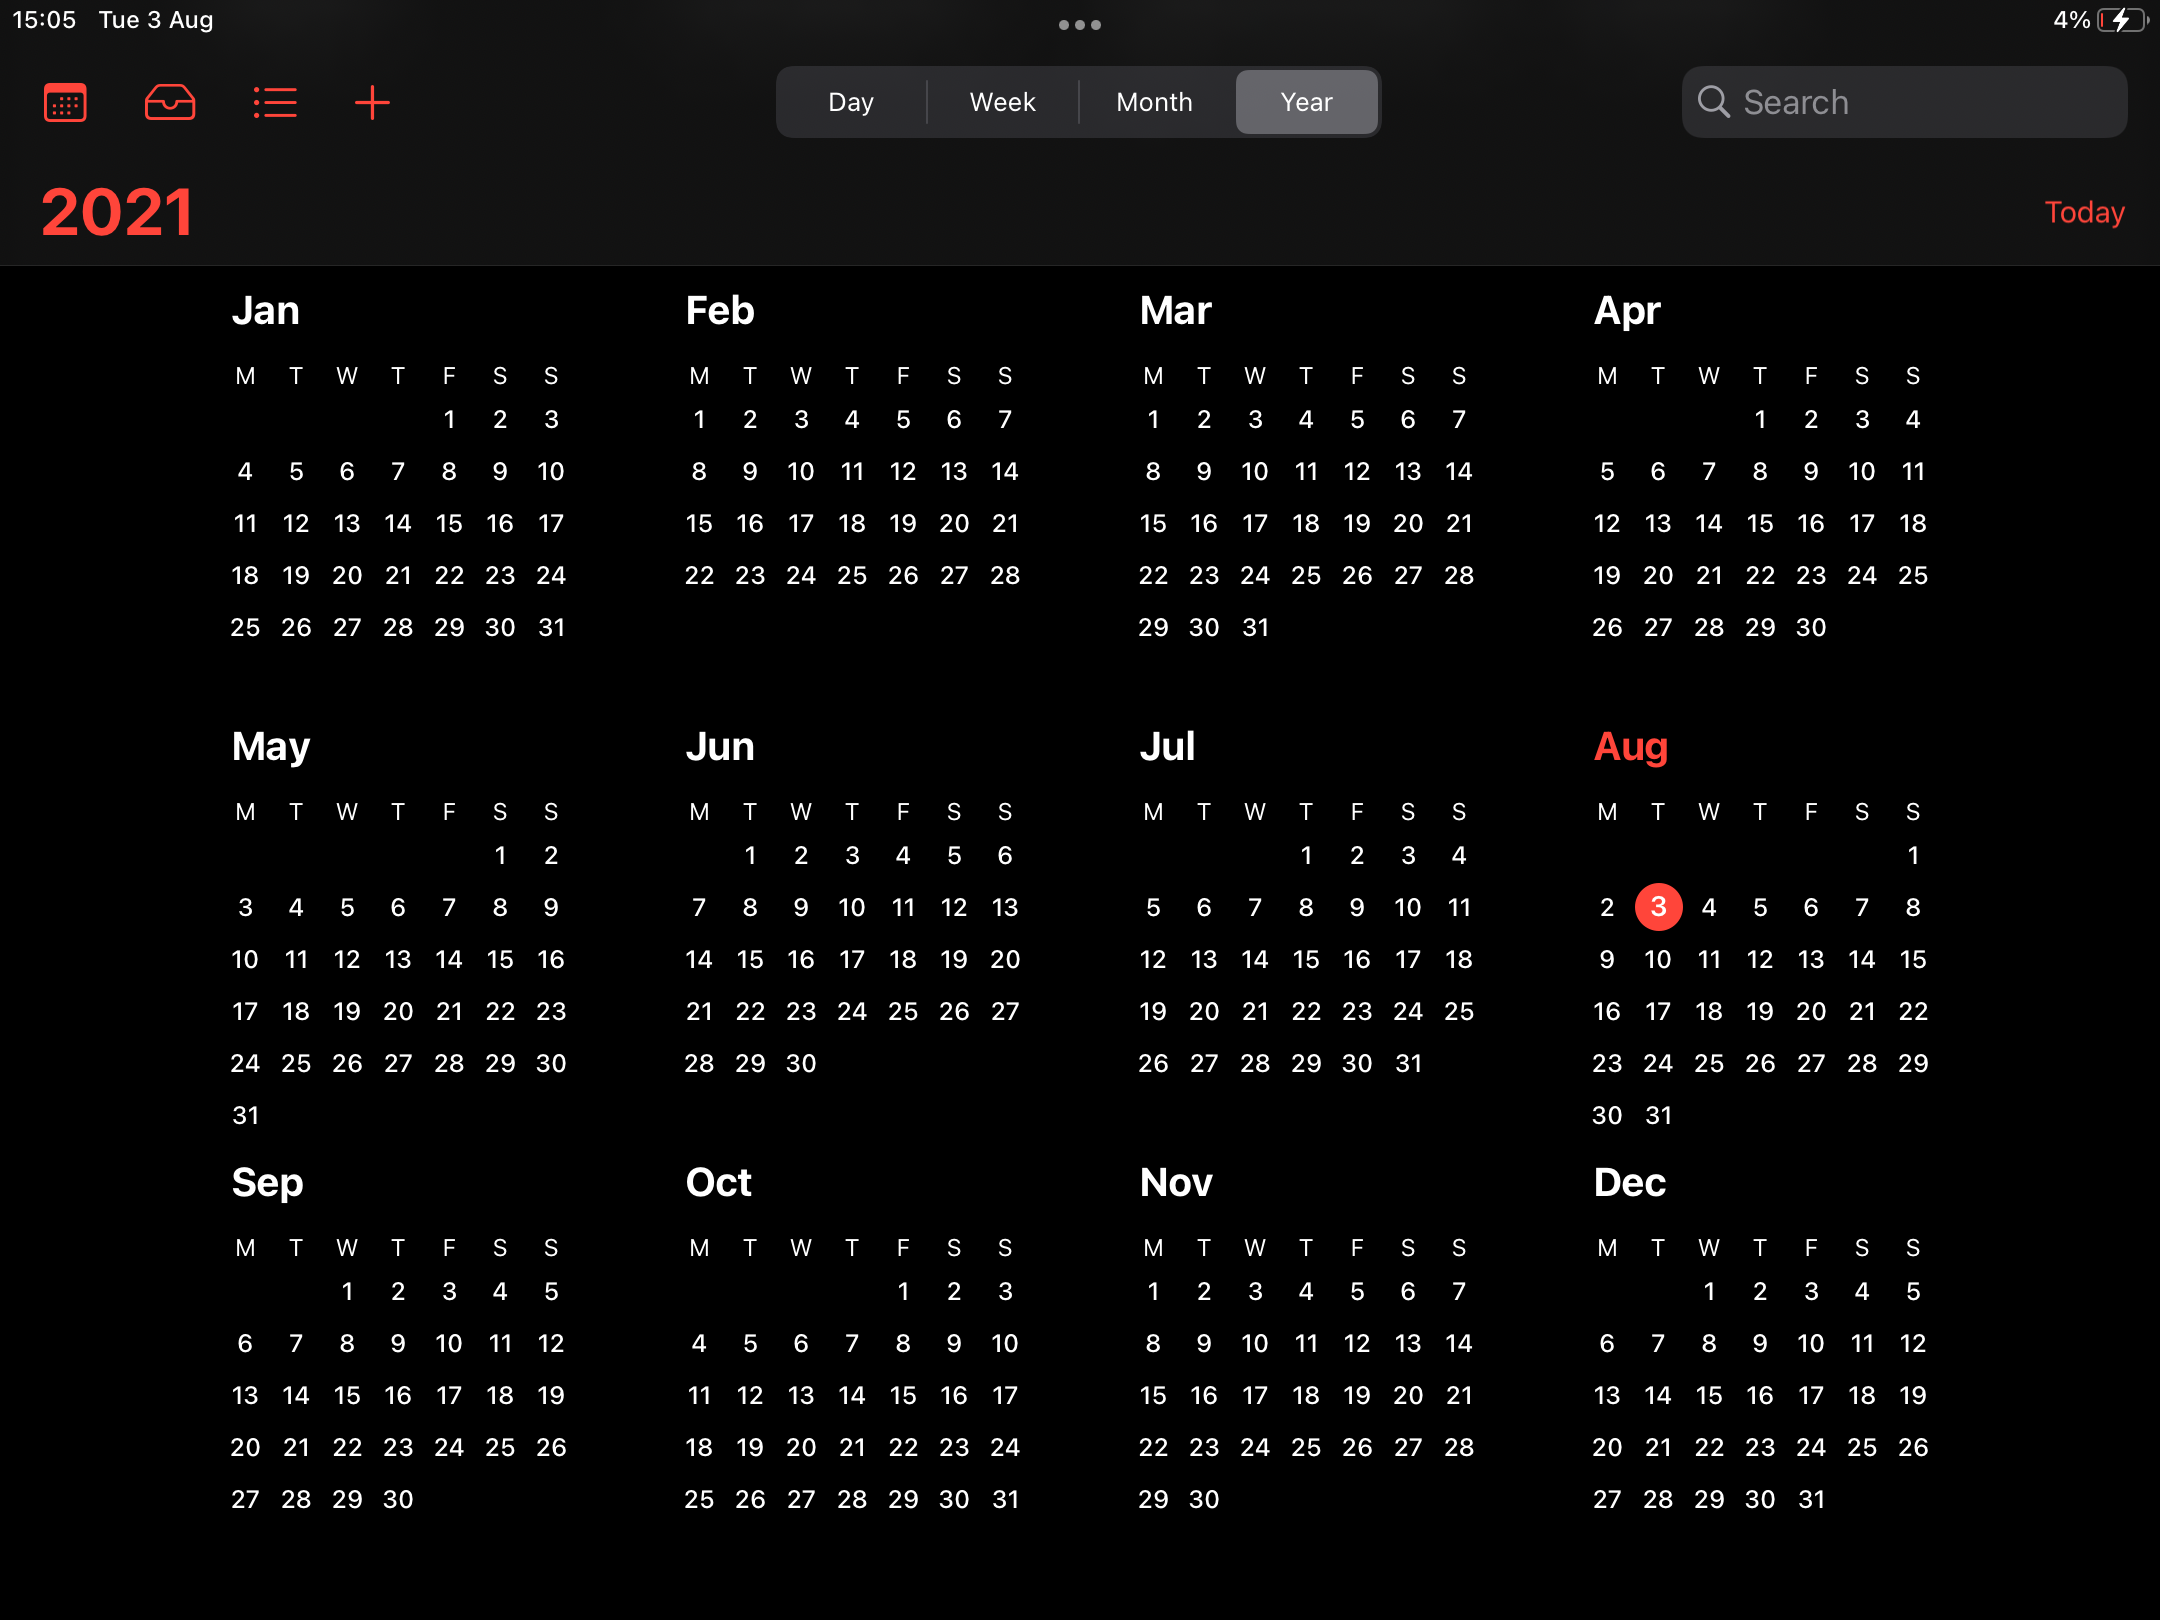 How to Delete Calendar Events on iPhone and iPad